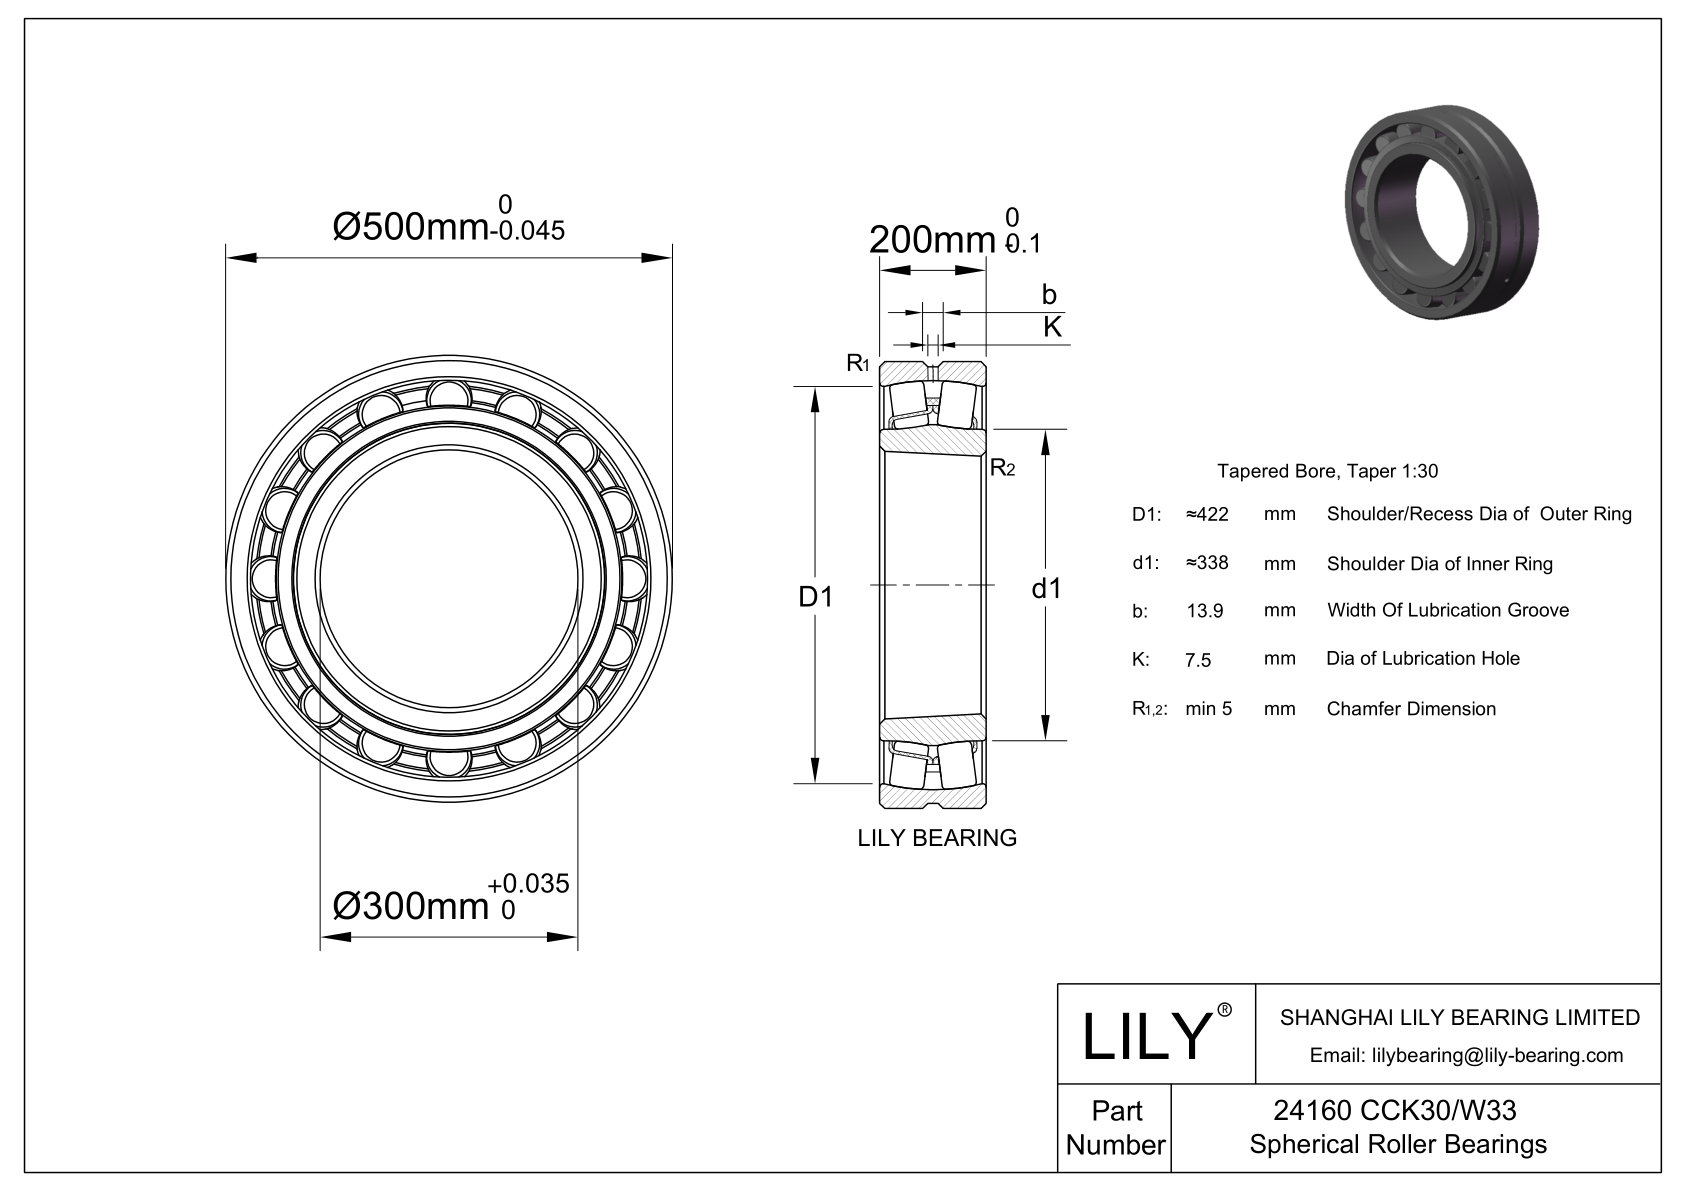 24160 CCK30/W33 Double Row Spherical Roller Bearing cad drawing